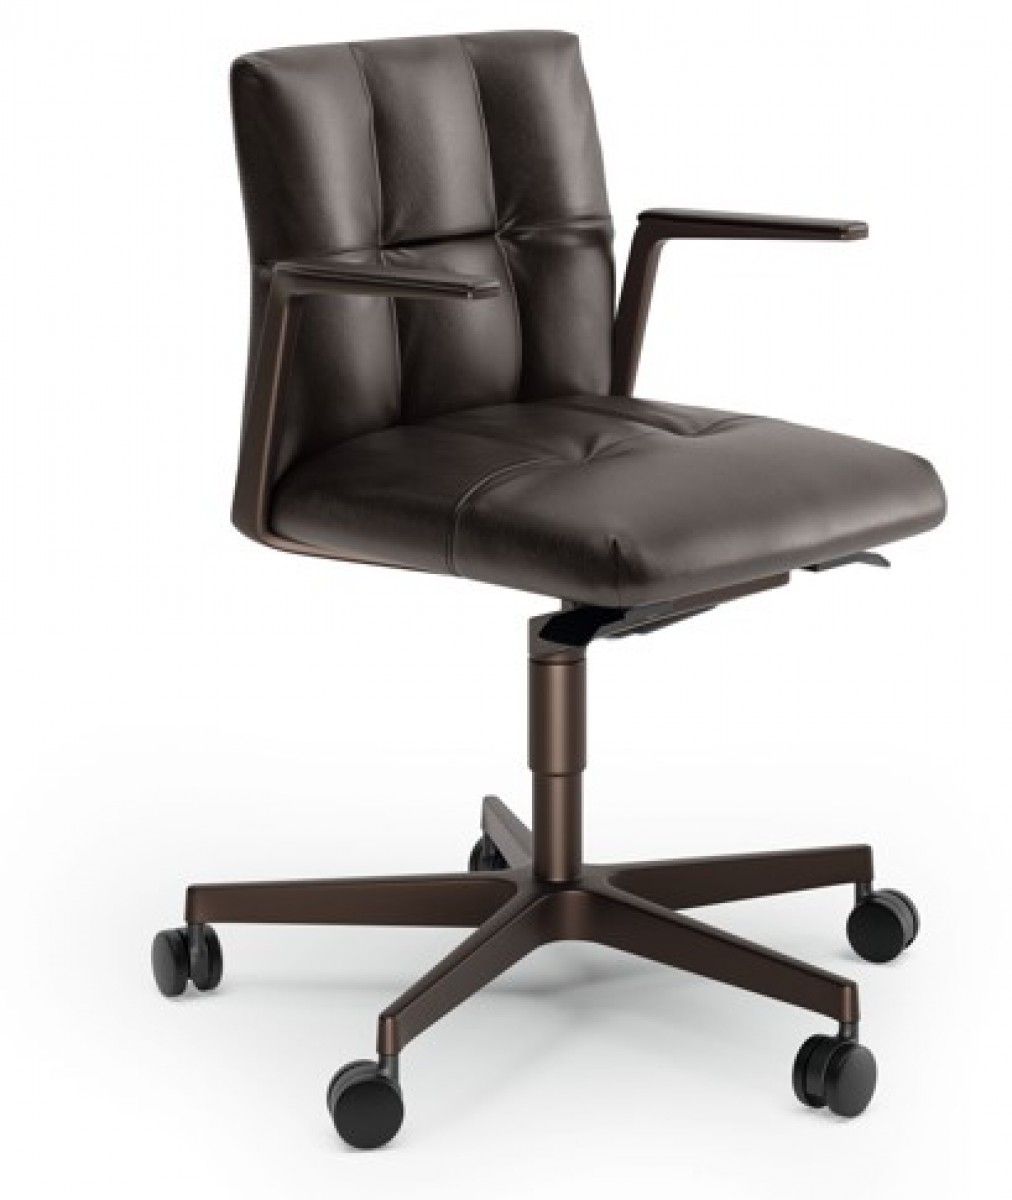 Leadchair Management Soft Swivel Chair, 5-Star Base with Casters and Arm with Leather Pad - Low Back